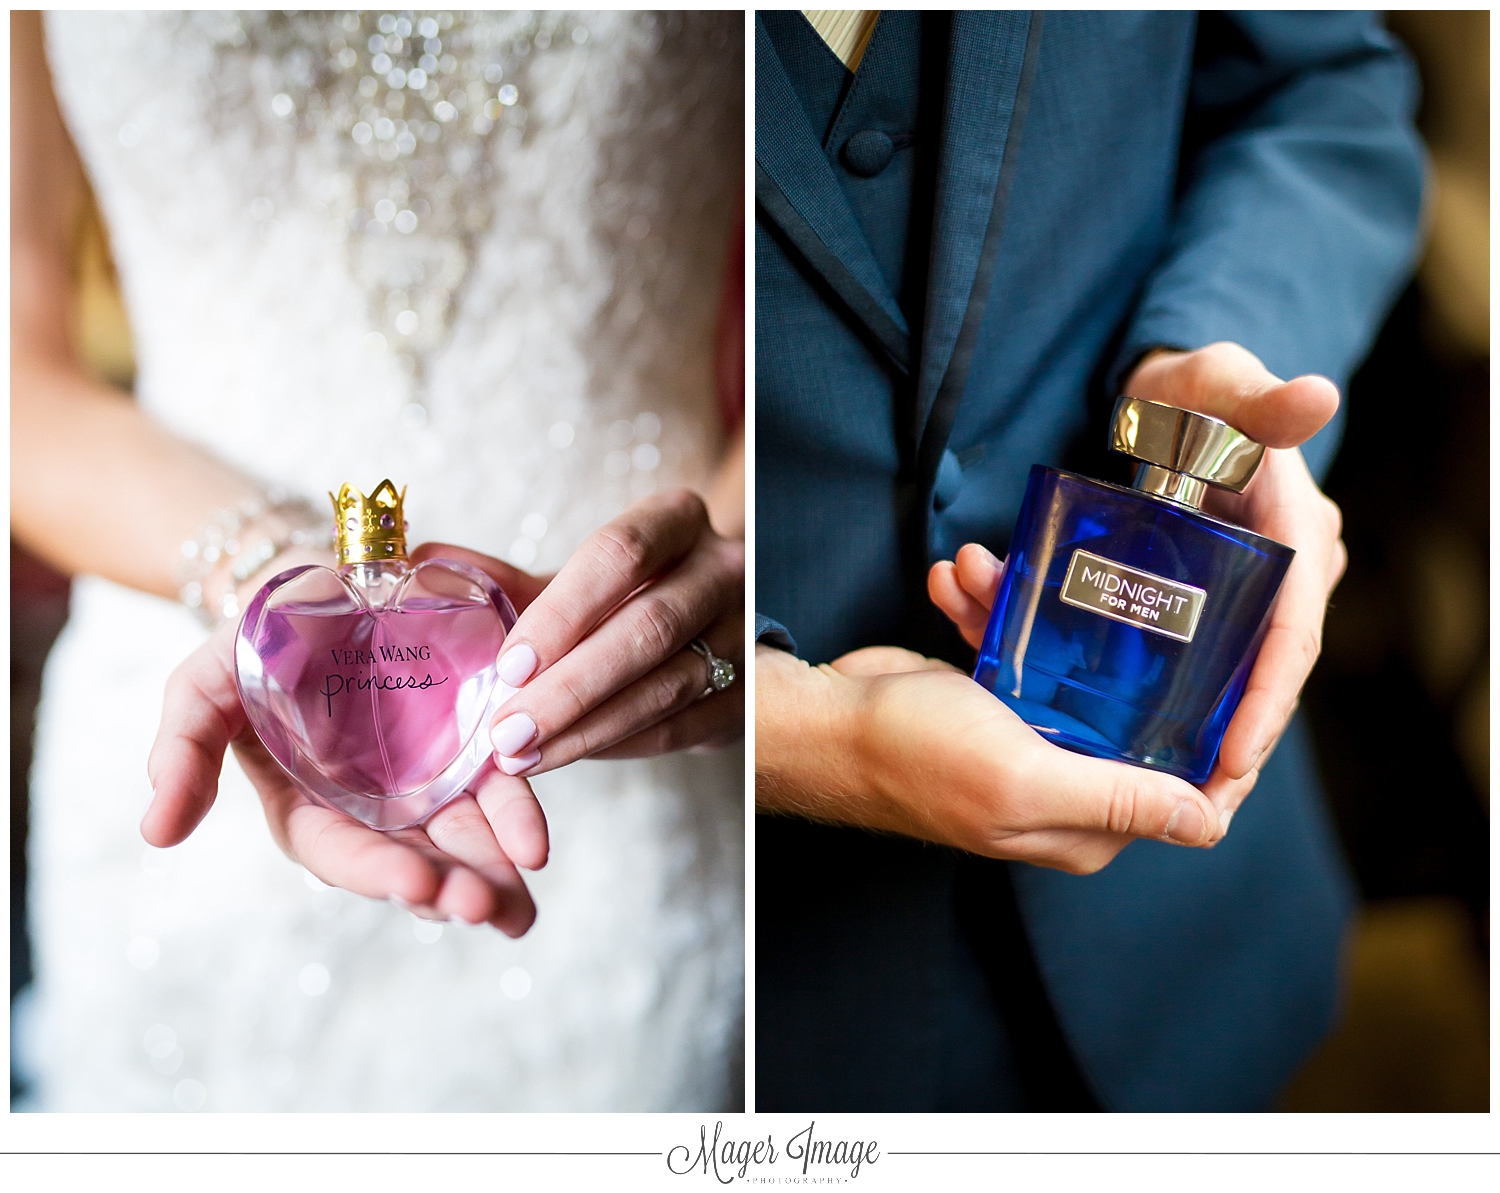 his hers perfumes cologne wedding day scent